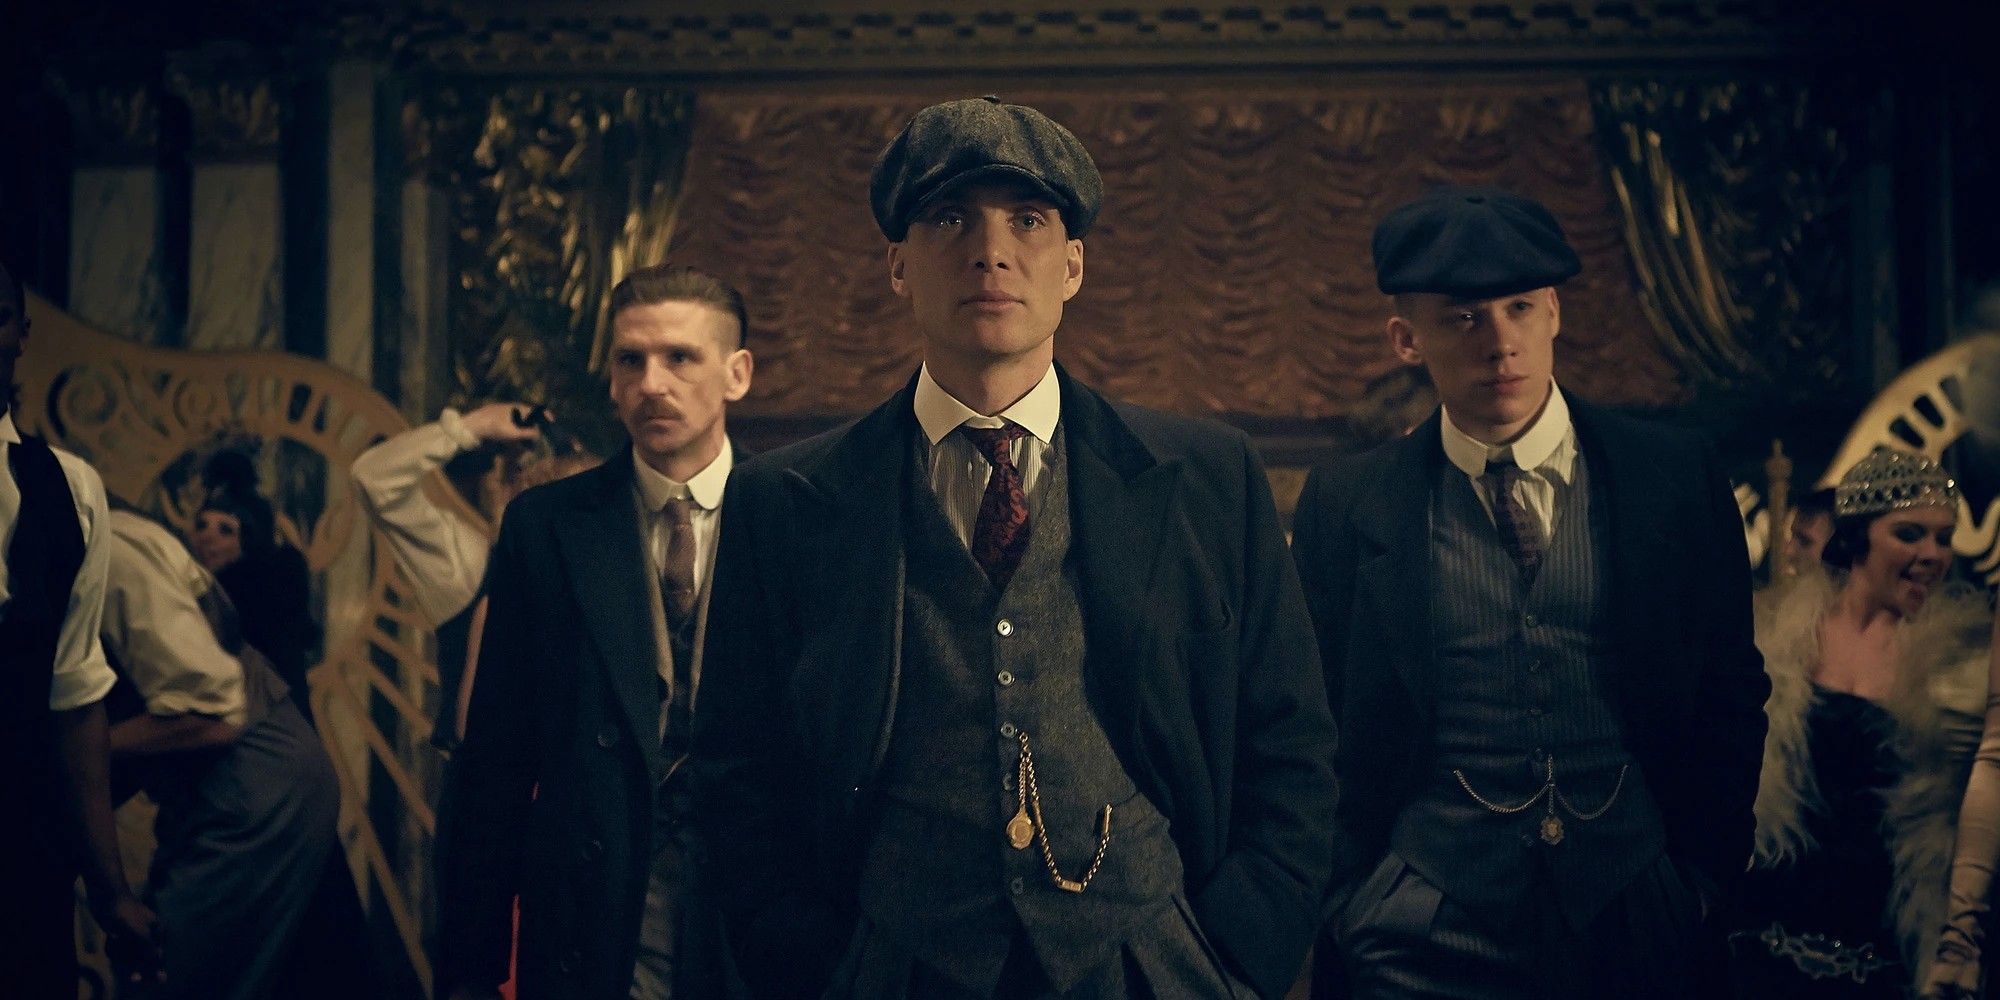 Arthur, Tommy and John Shelby walking into a party in Peaky Blinders.